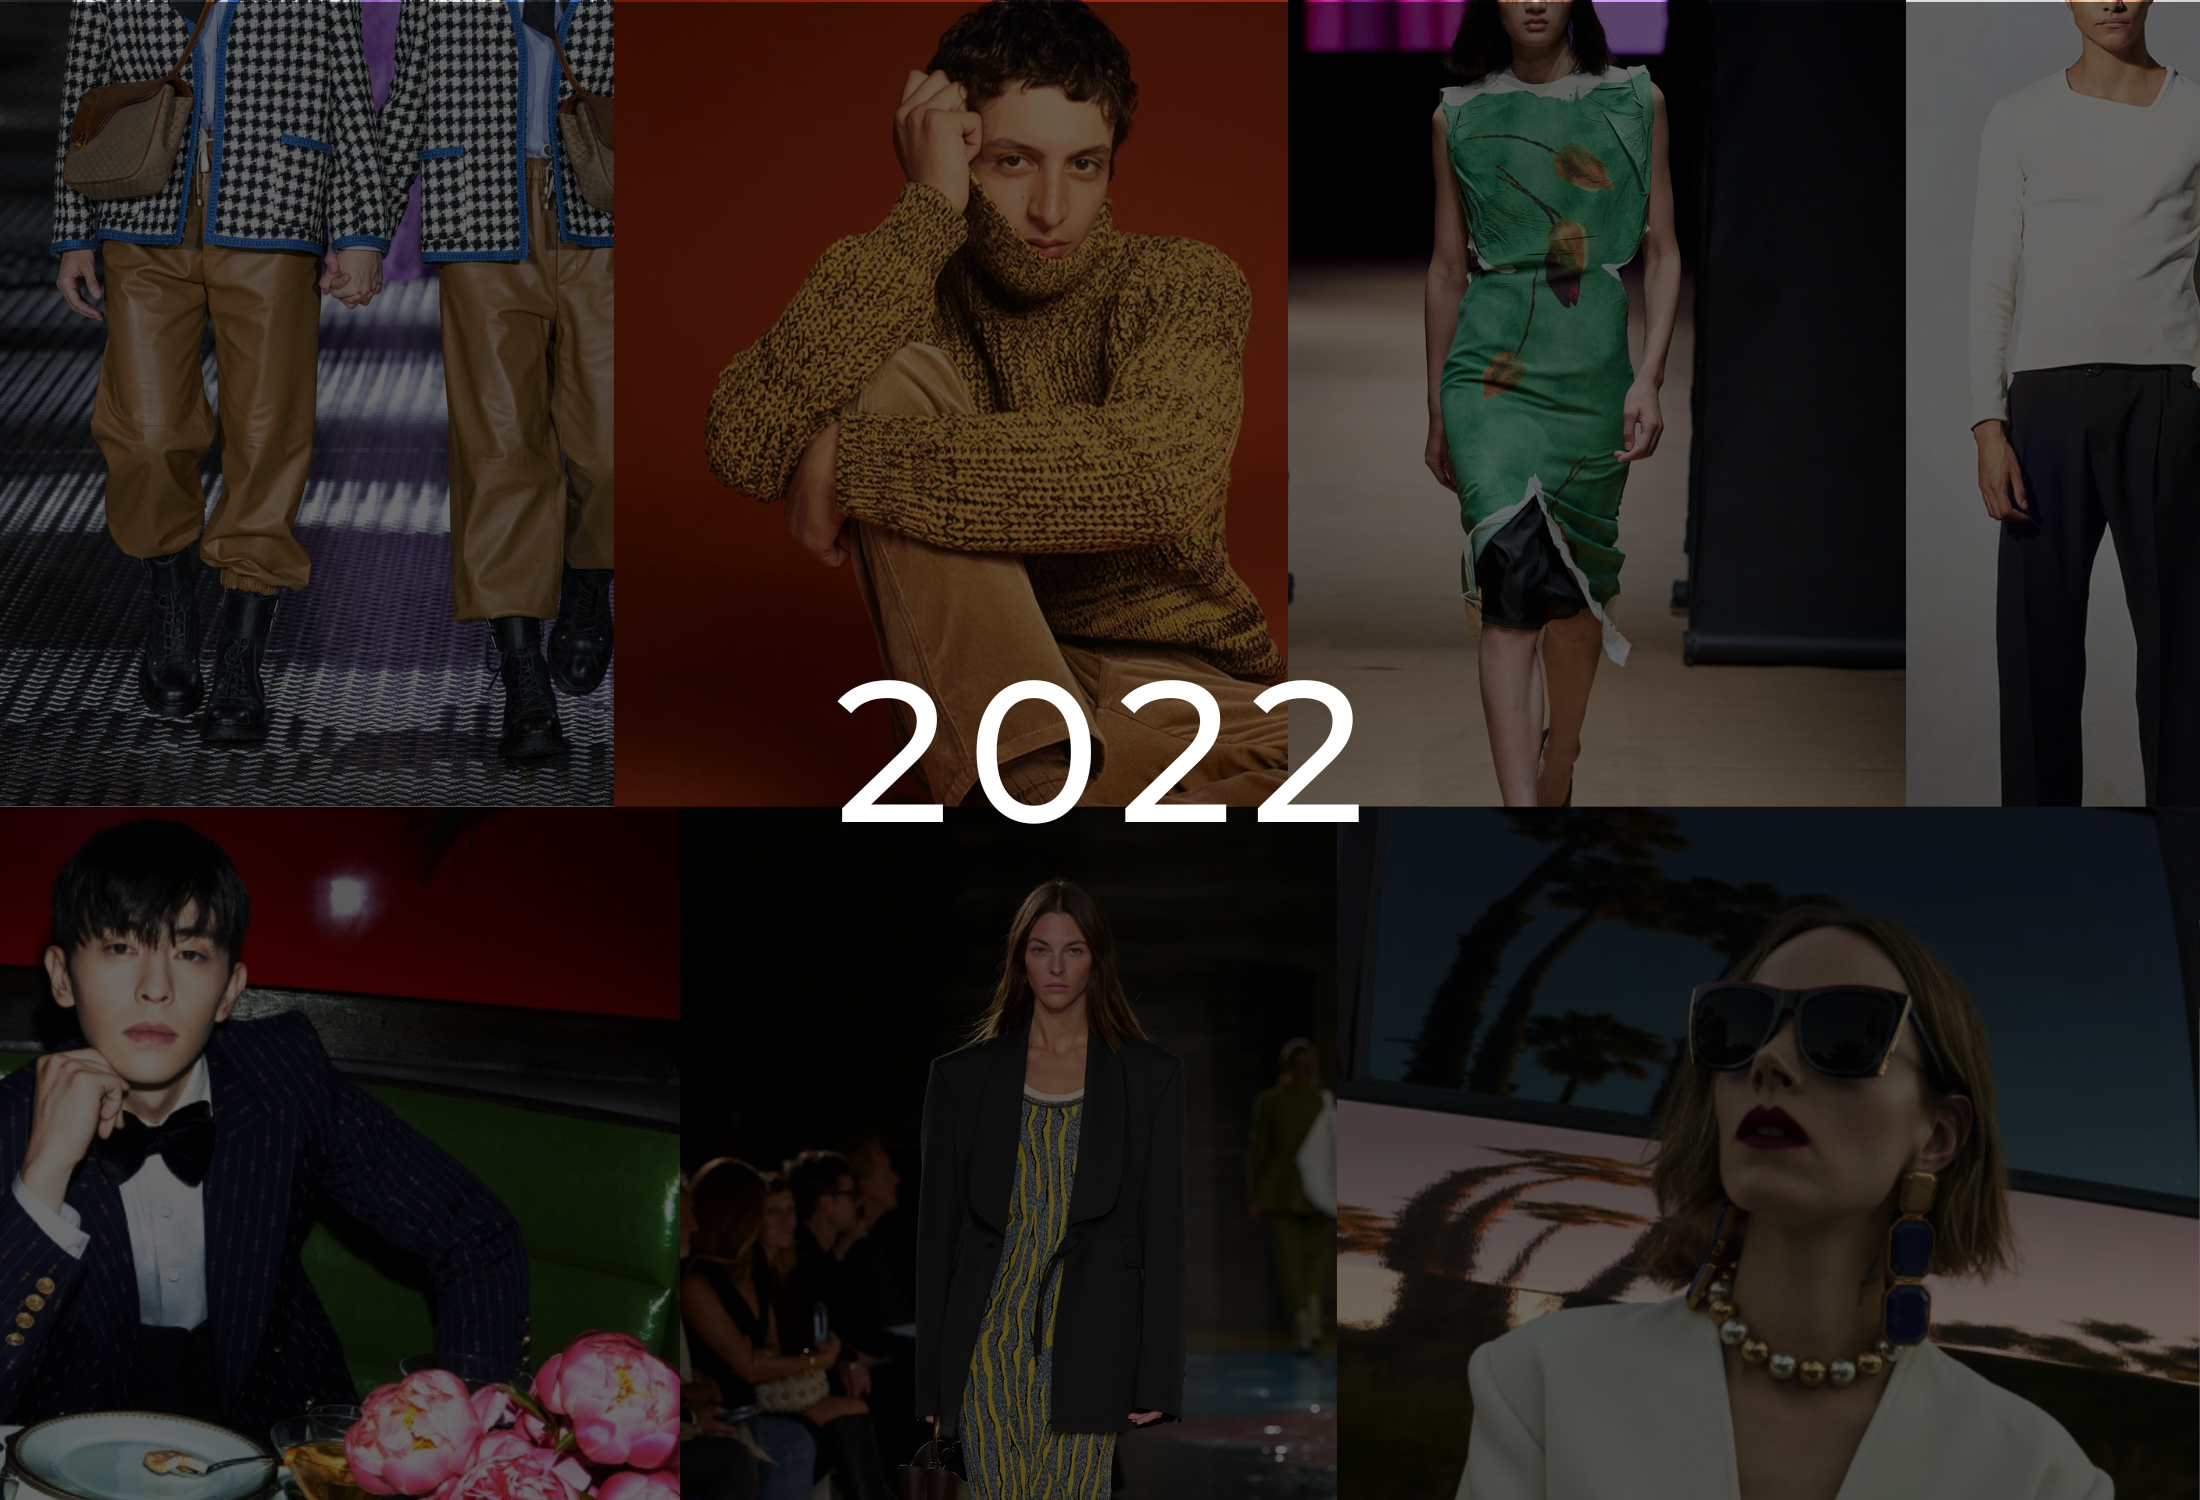 2022: A YEAR OF CHANGE